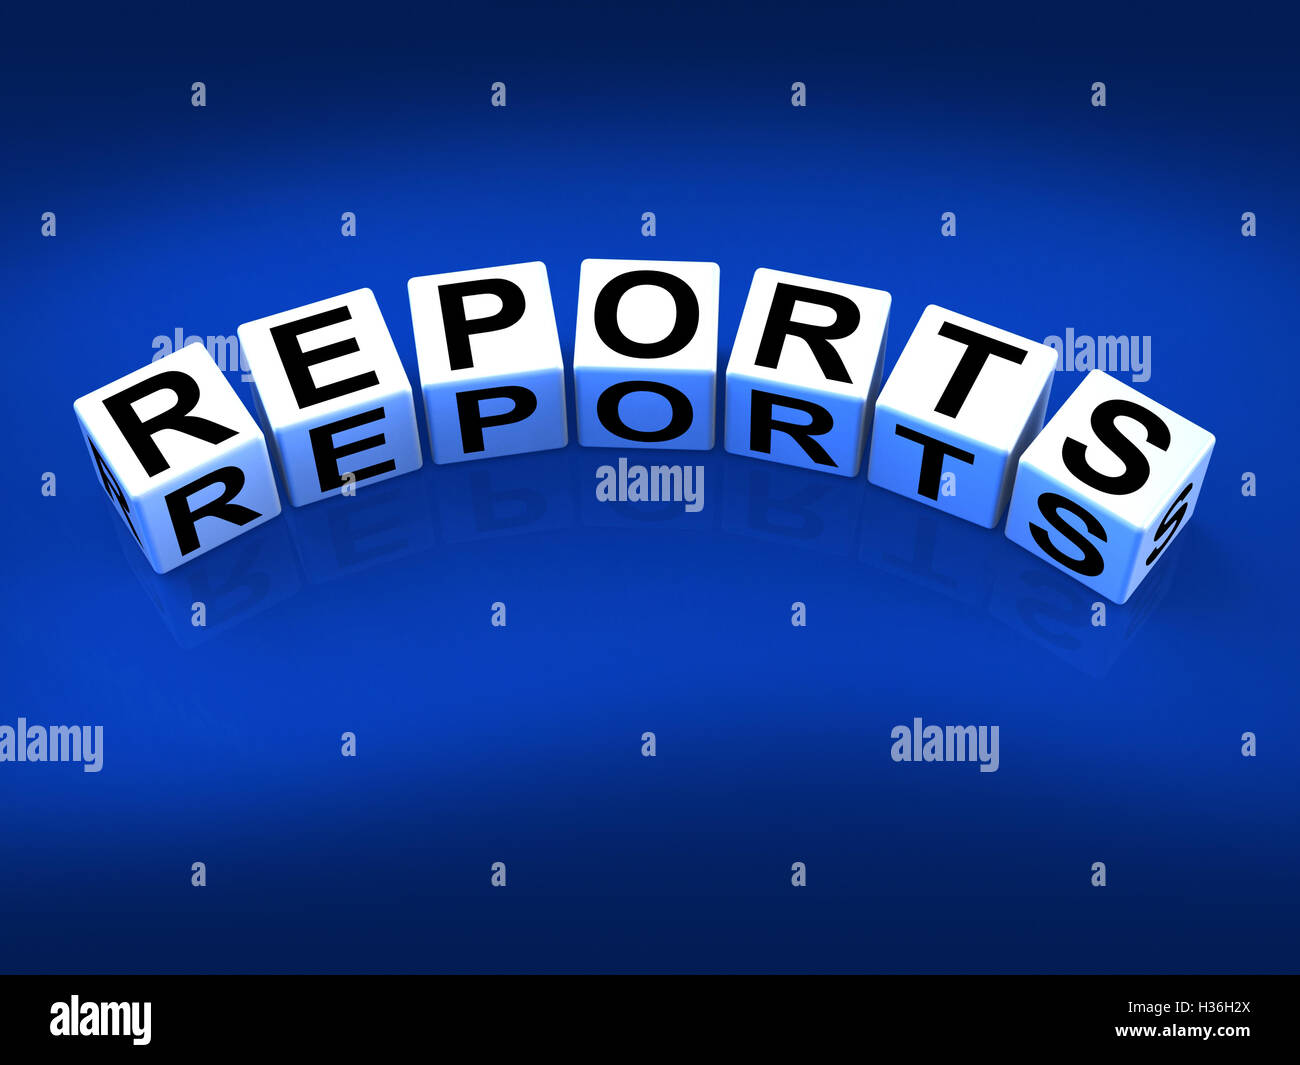 Reports Blocks Represent Reported Information or Articles Stock Photo